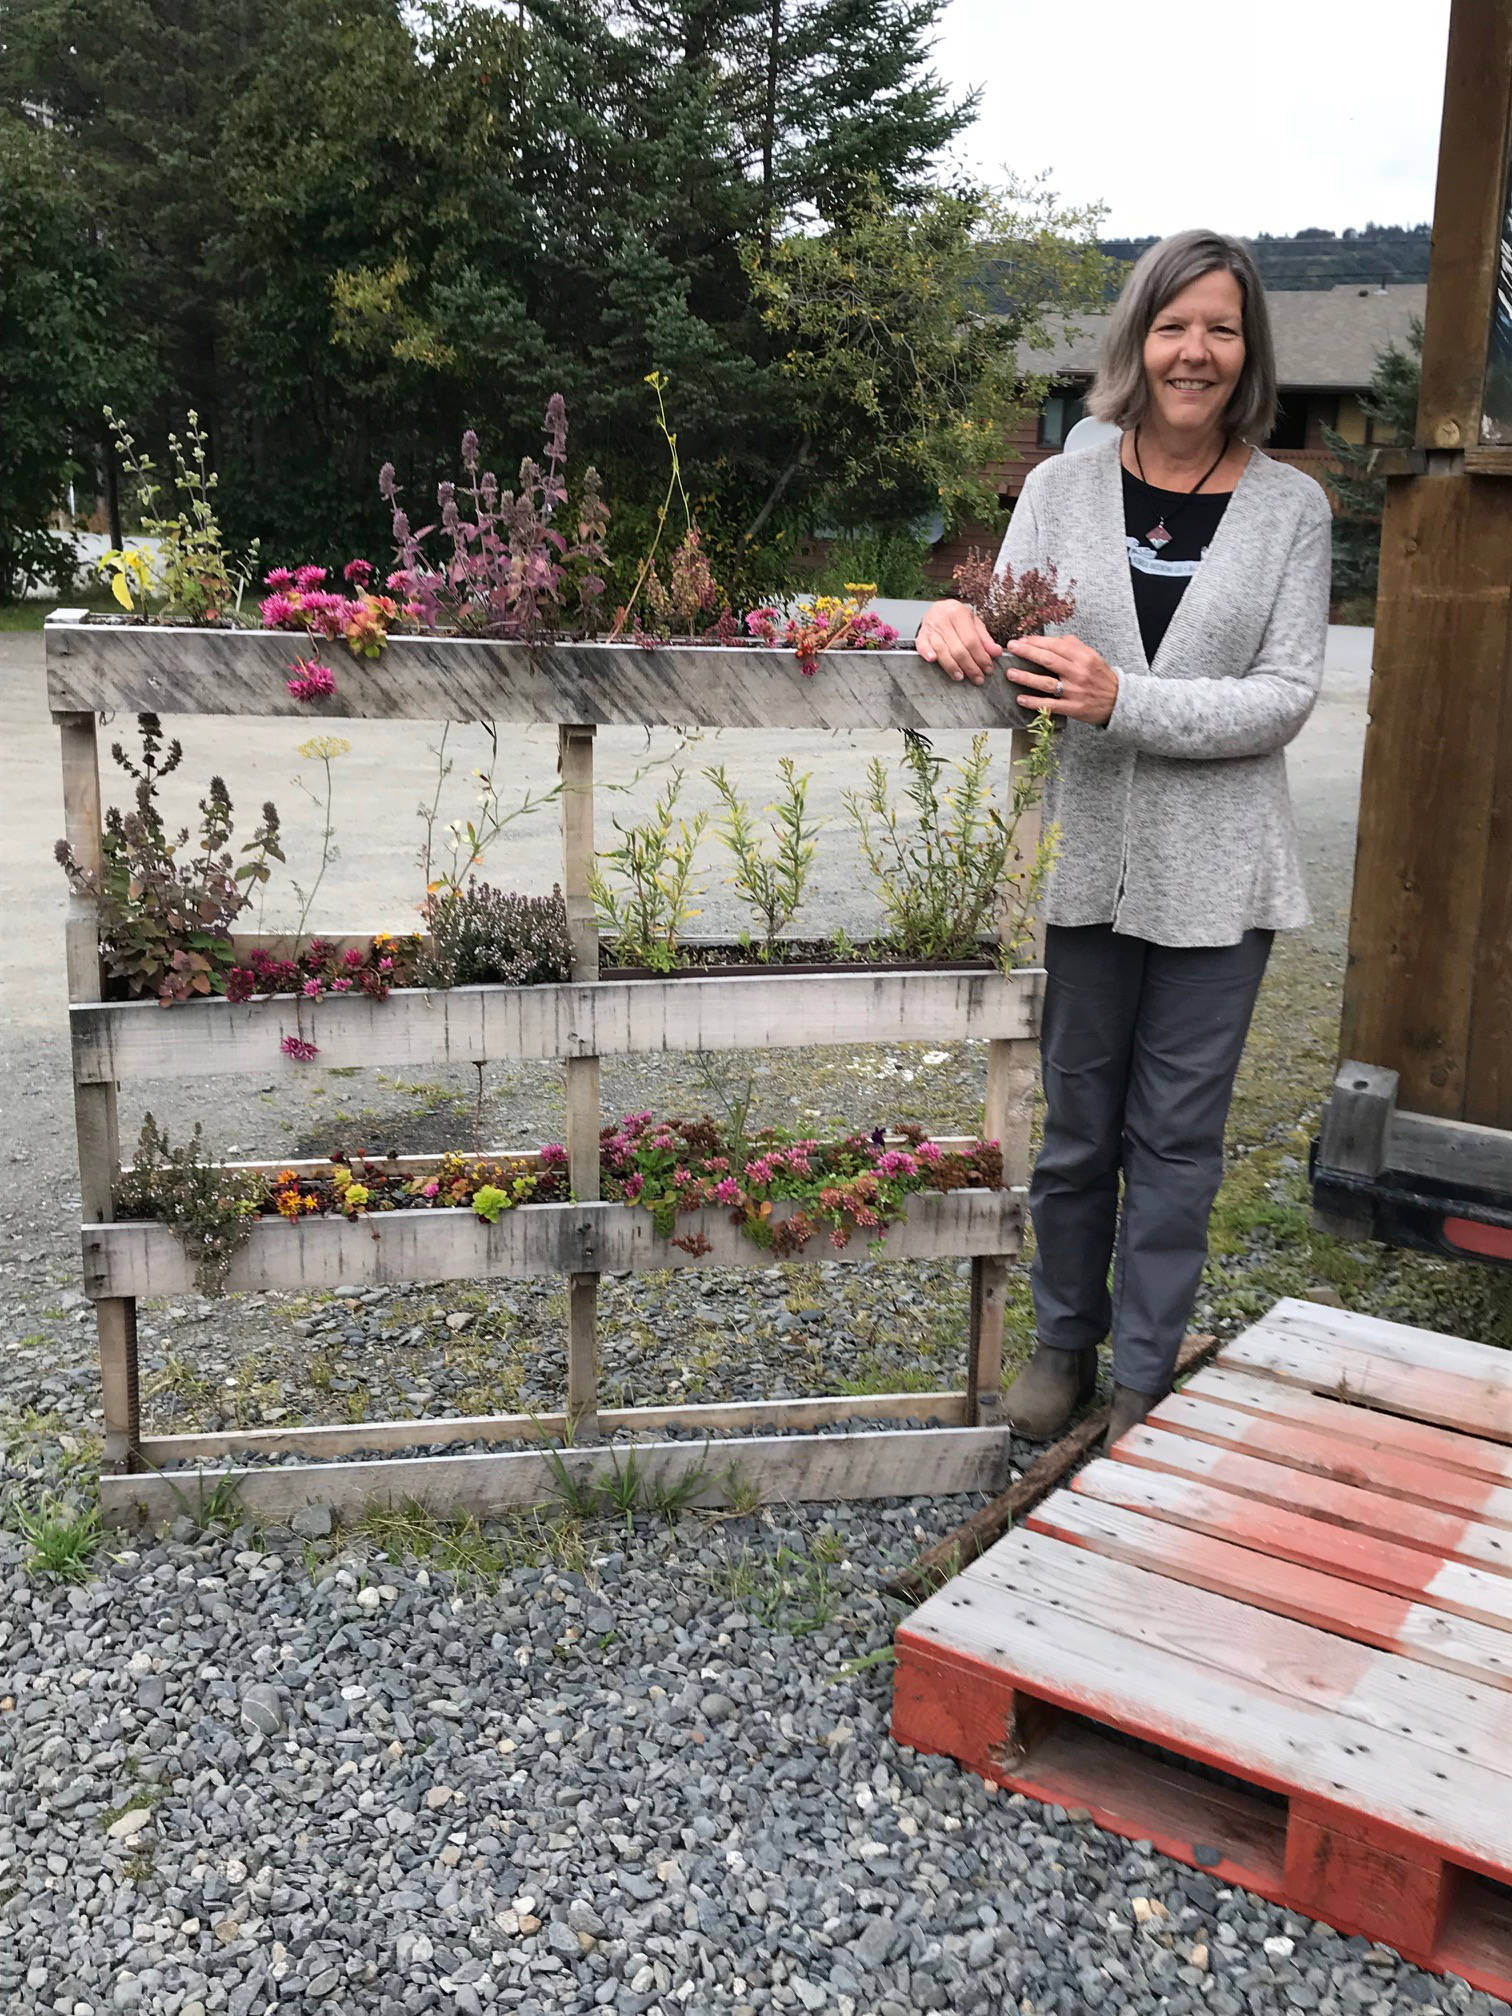 Karen Berger at Homer Brewing stands by her appealing application of pallets on Sept. 21, 2018, in Homer, Alaska. (Photo by Rosemary Fitzpatrick)